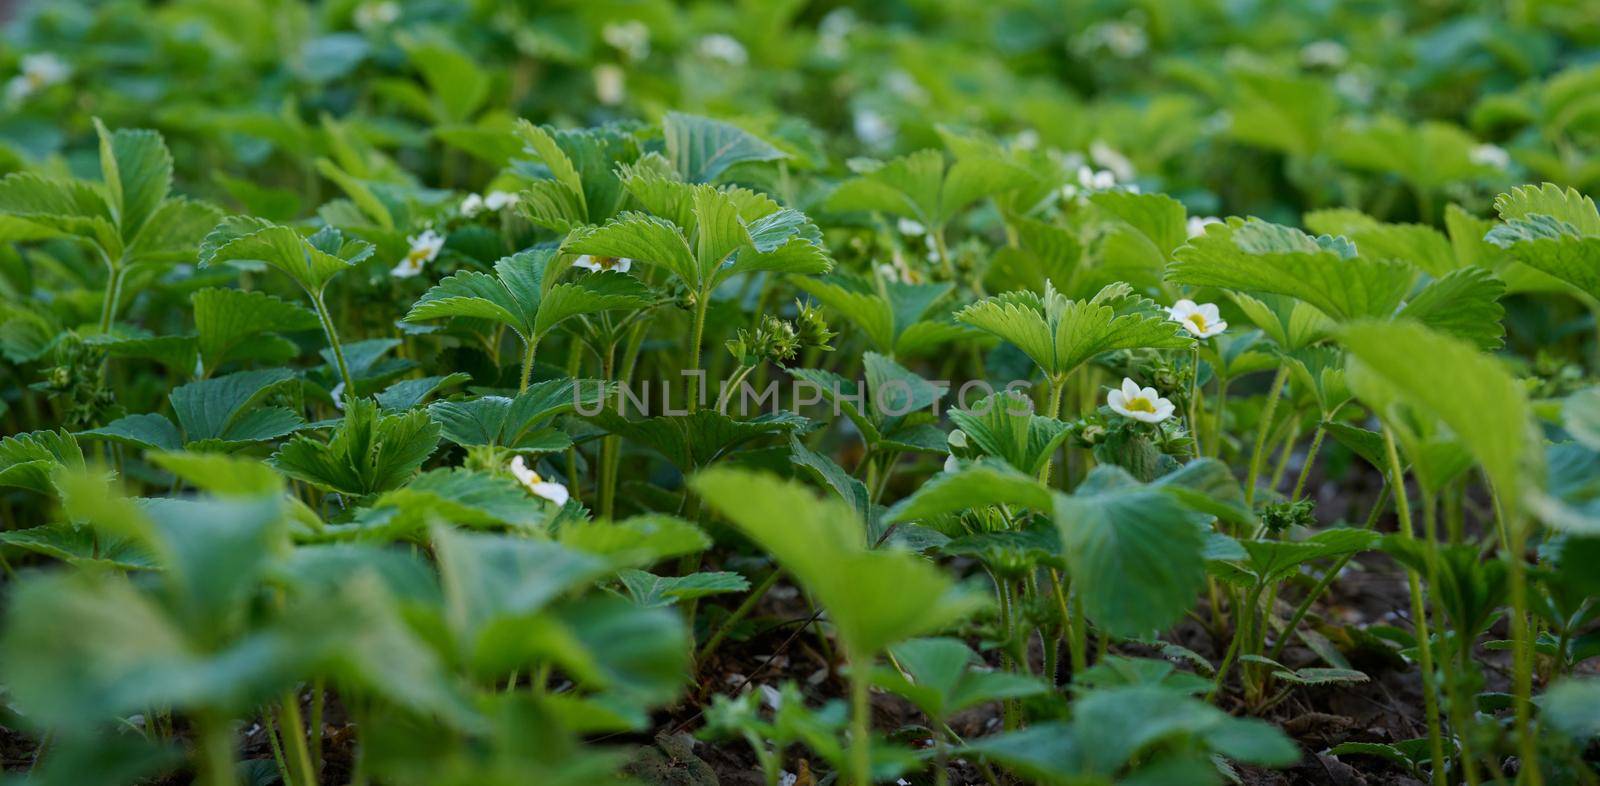 Strawberry bush with green leaves and white flowers in vegetable garden, fruit growing by ndanko